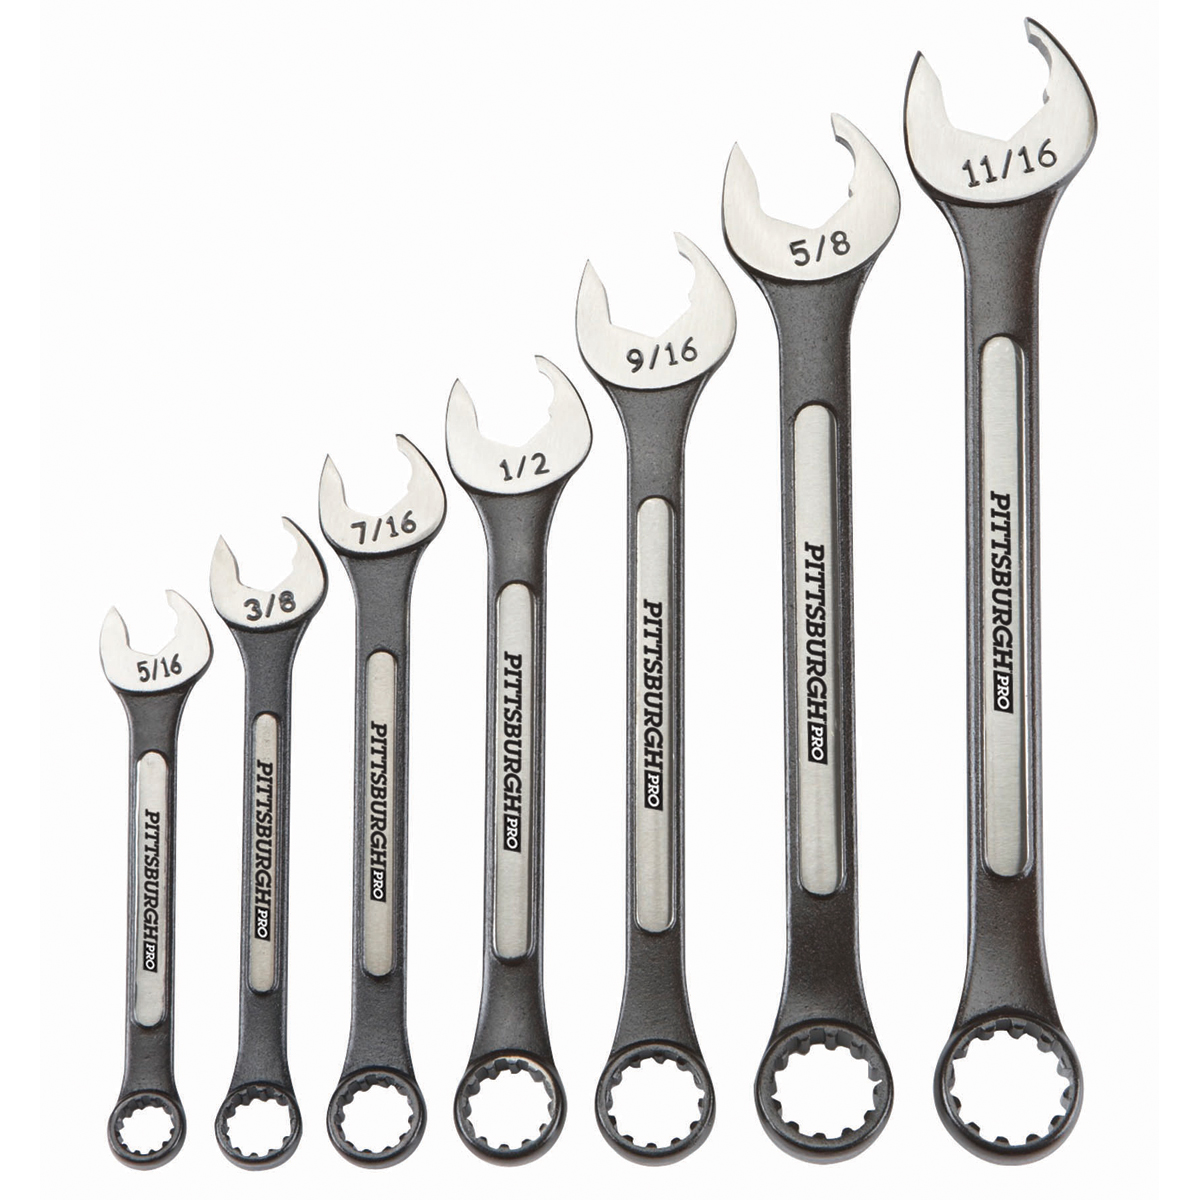 PITTSBURGH Universal SAE Combination Wrench Set – 7 Pc. – Item 69330